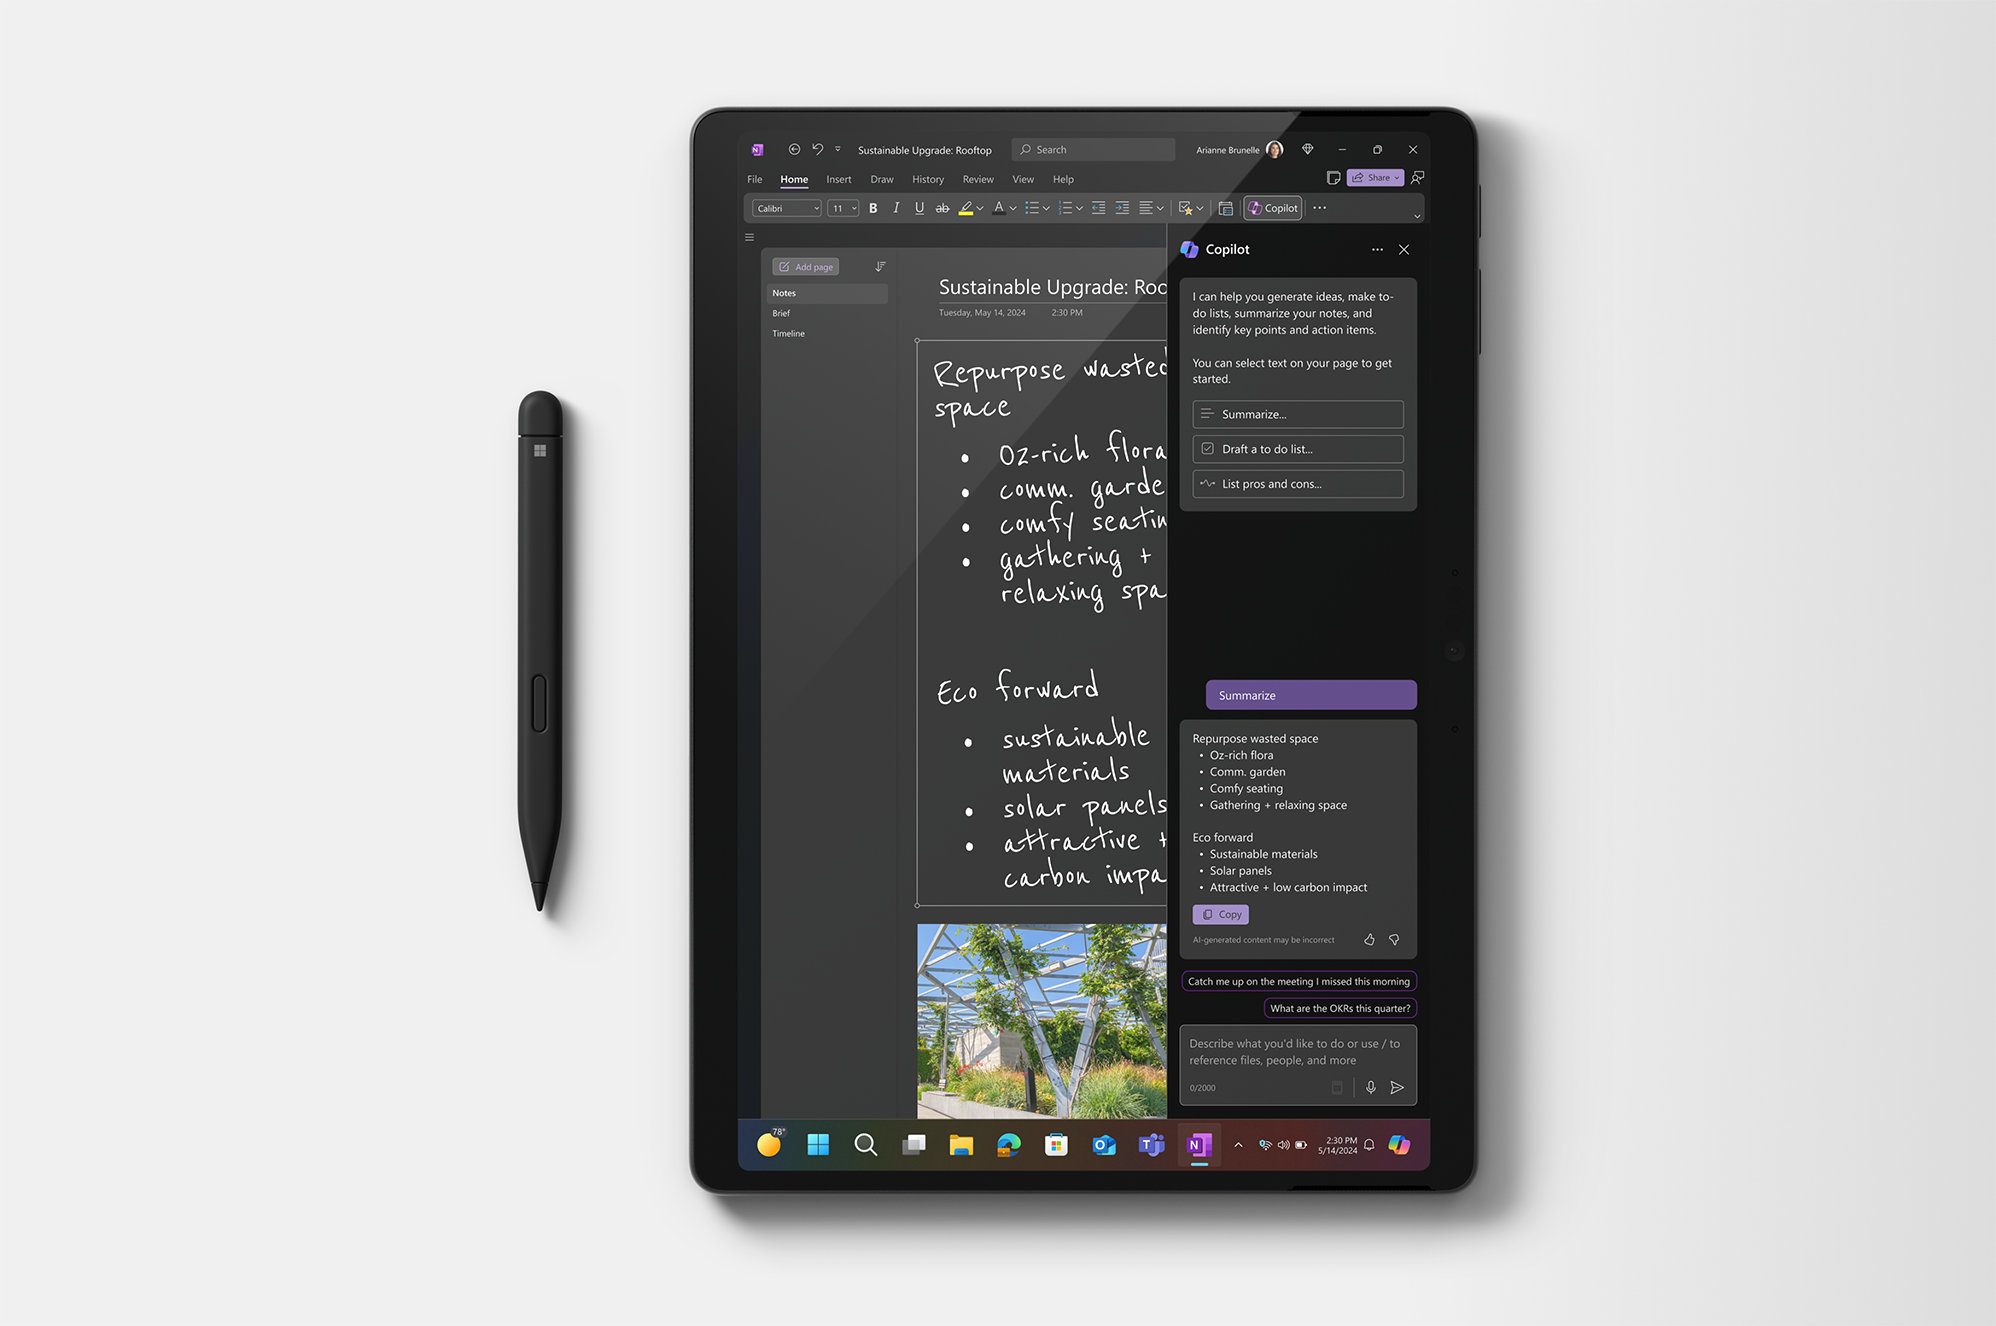 An image showing Surface Pro in tablet mode, with a Surface Slim Pen on the left side of the image.